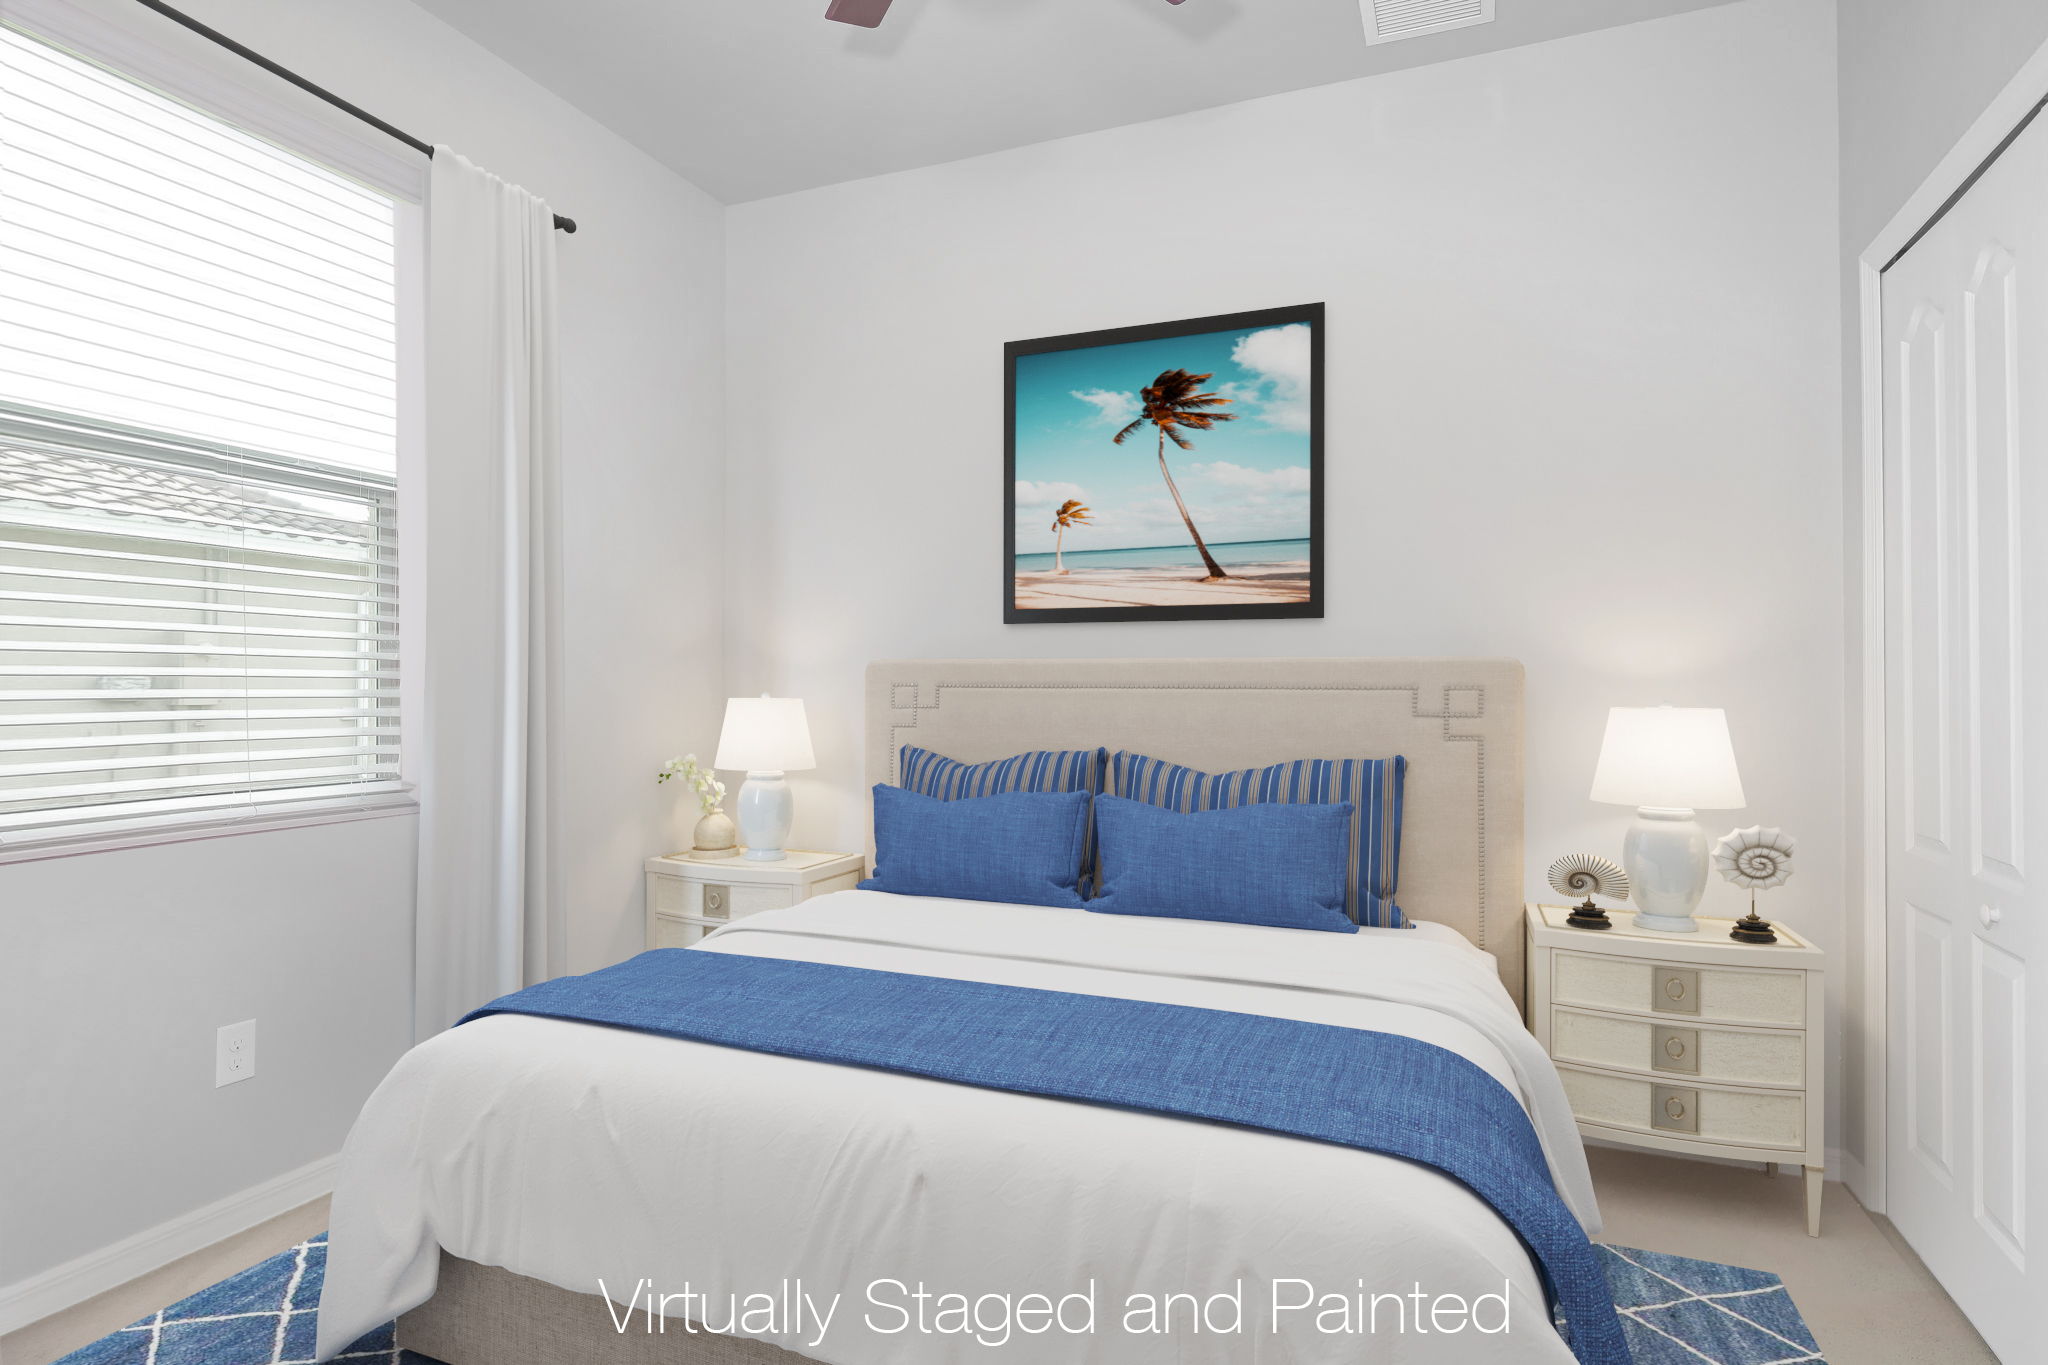 Virtually Staged & Painted Bedroom 2